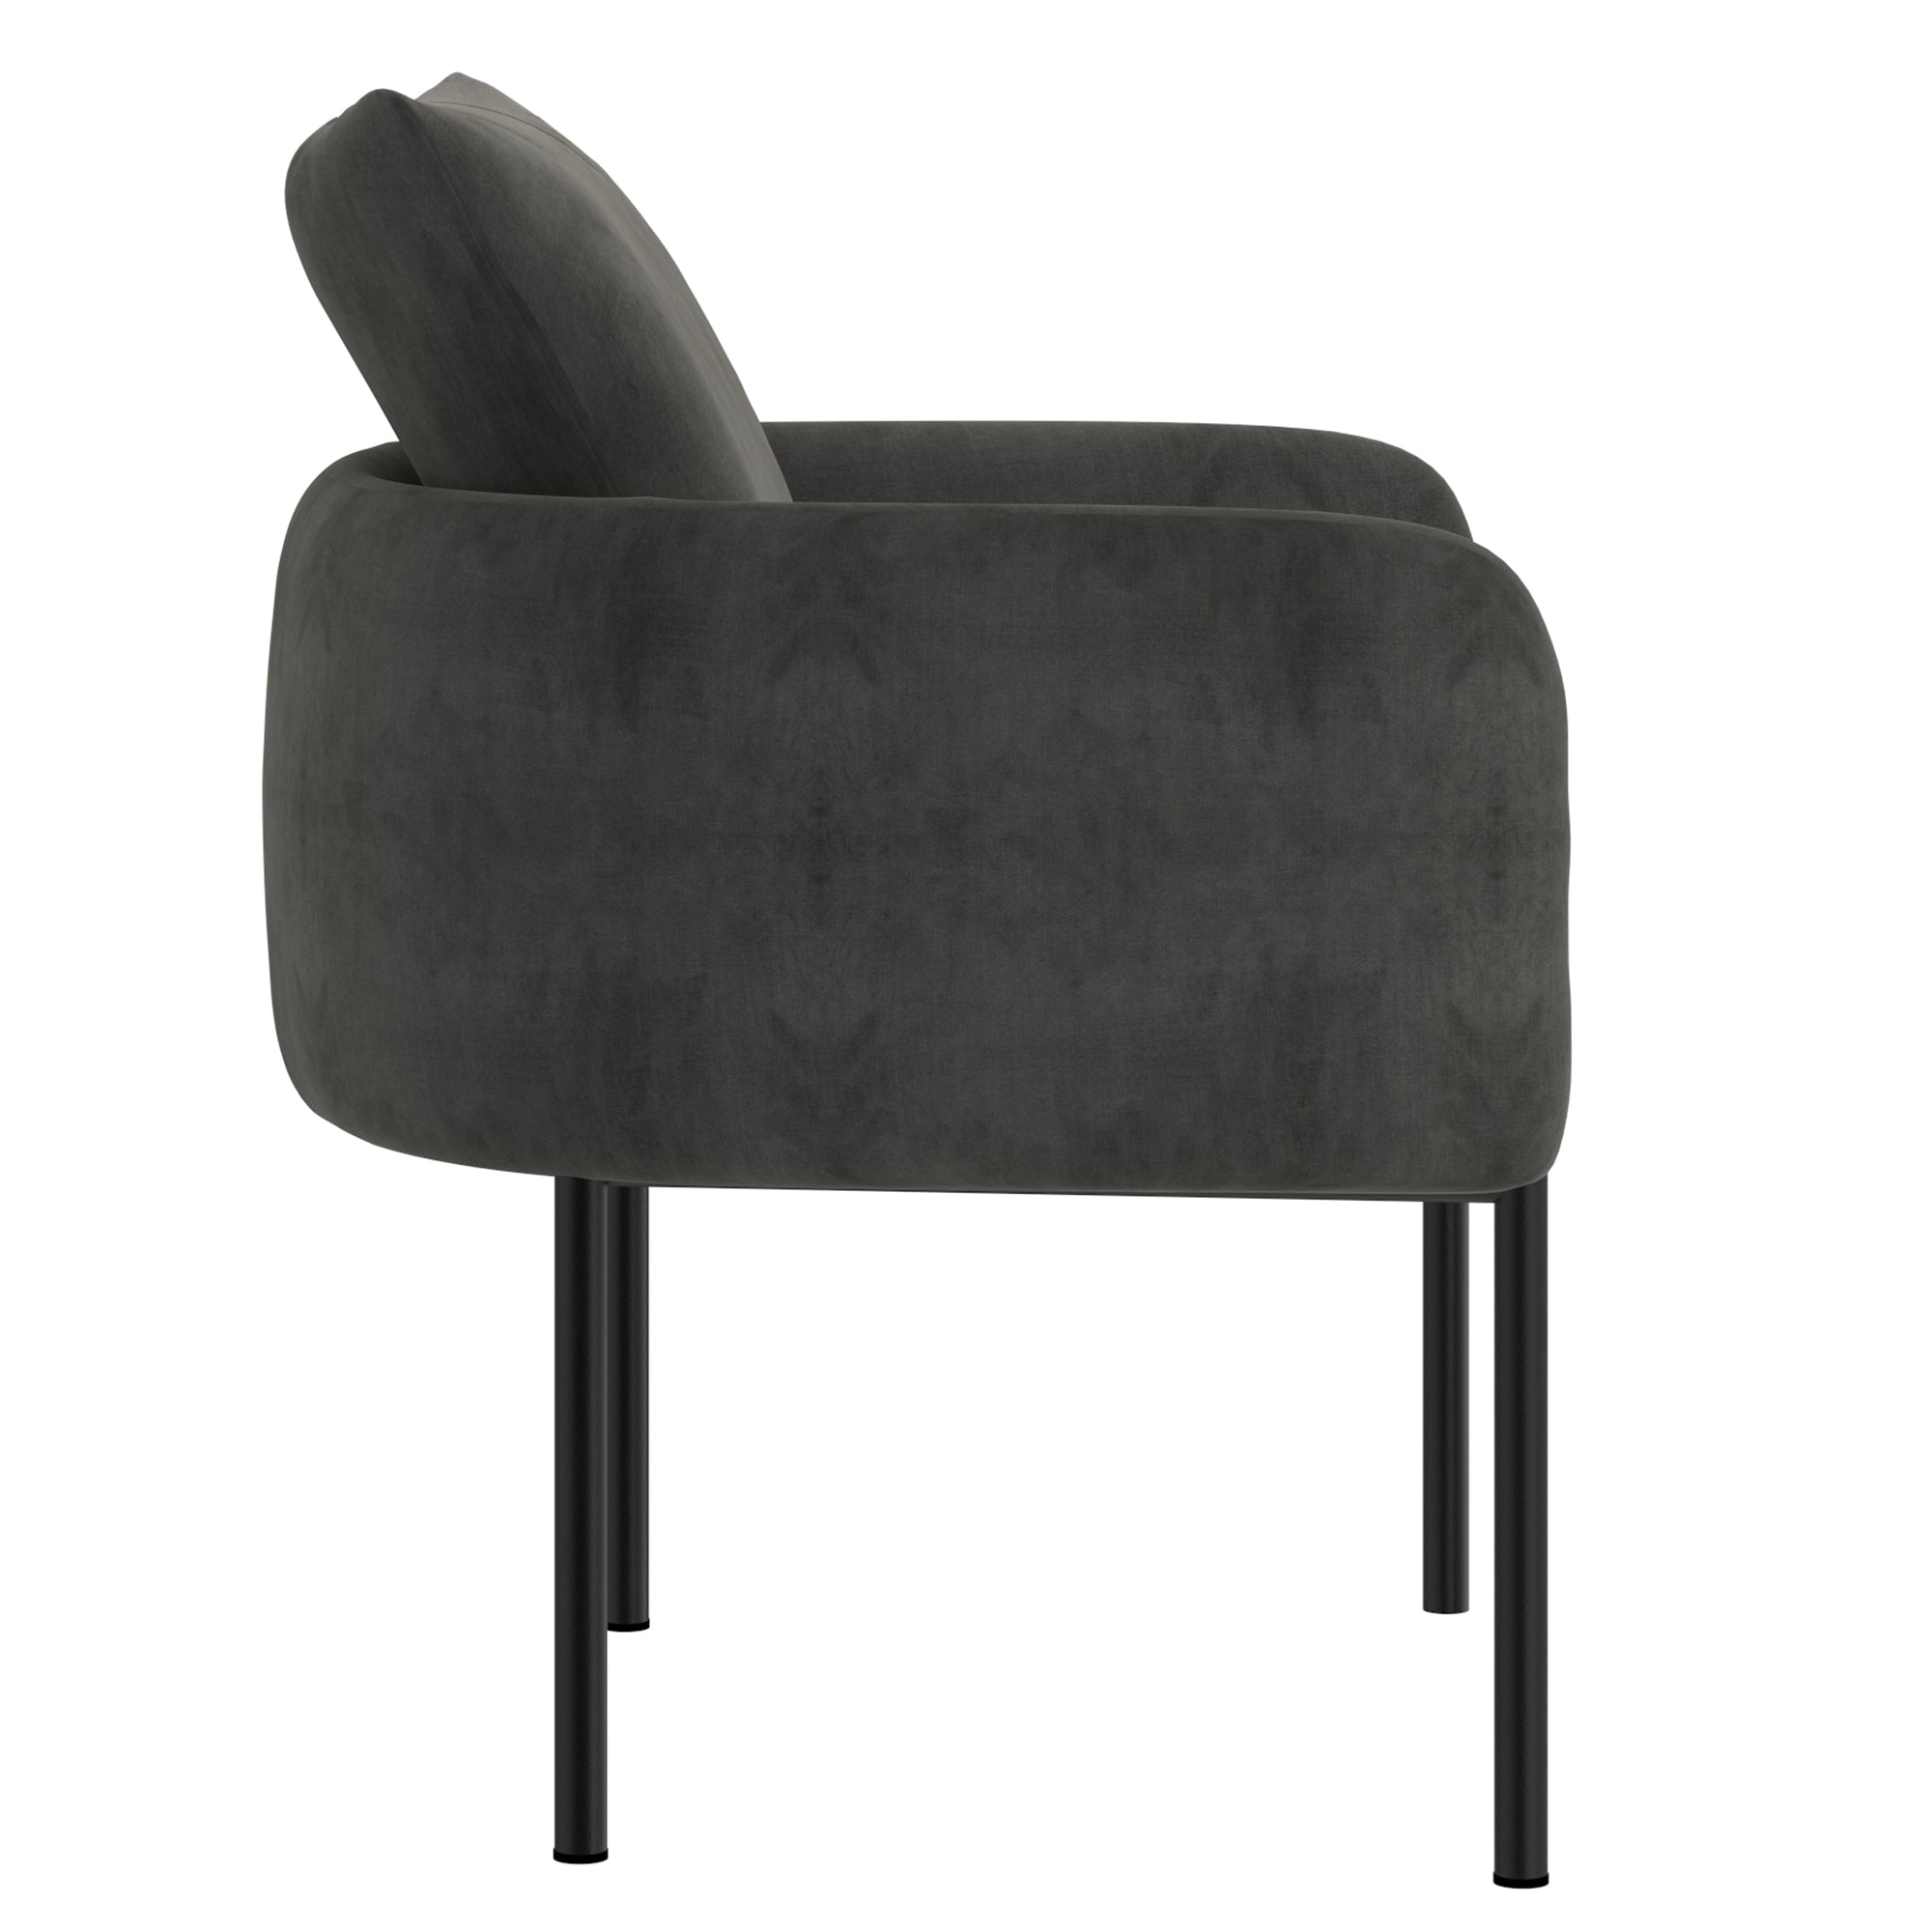 Petrie Accent Chair in Charcoal with Black Leg 403-556CH/BK